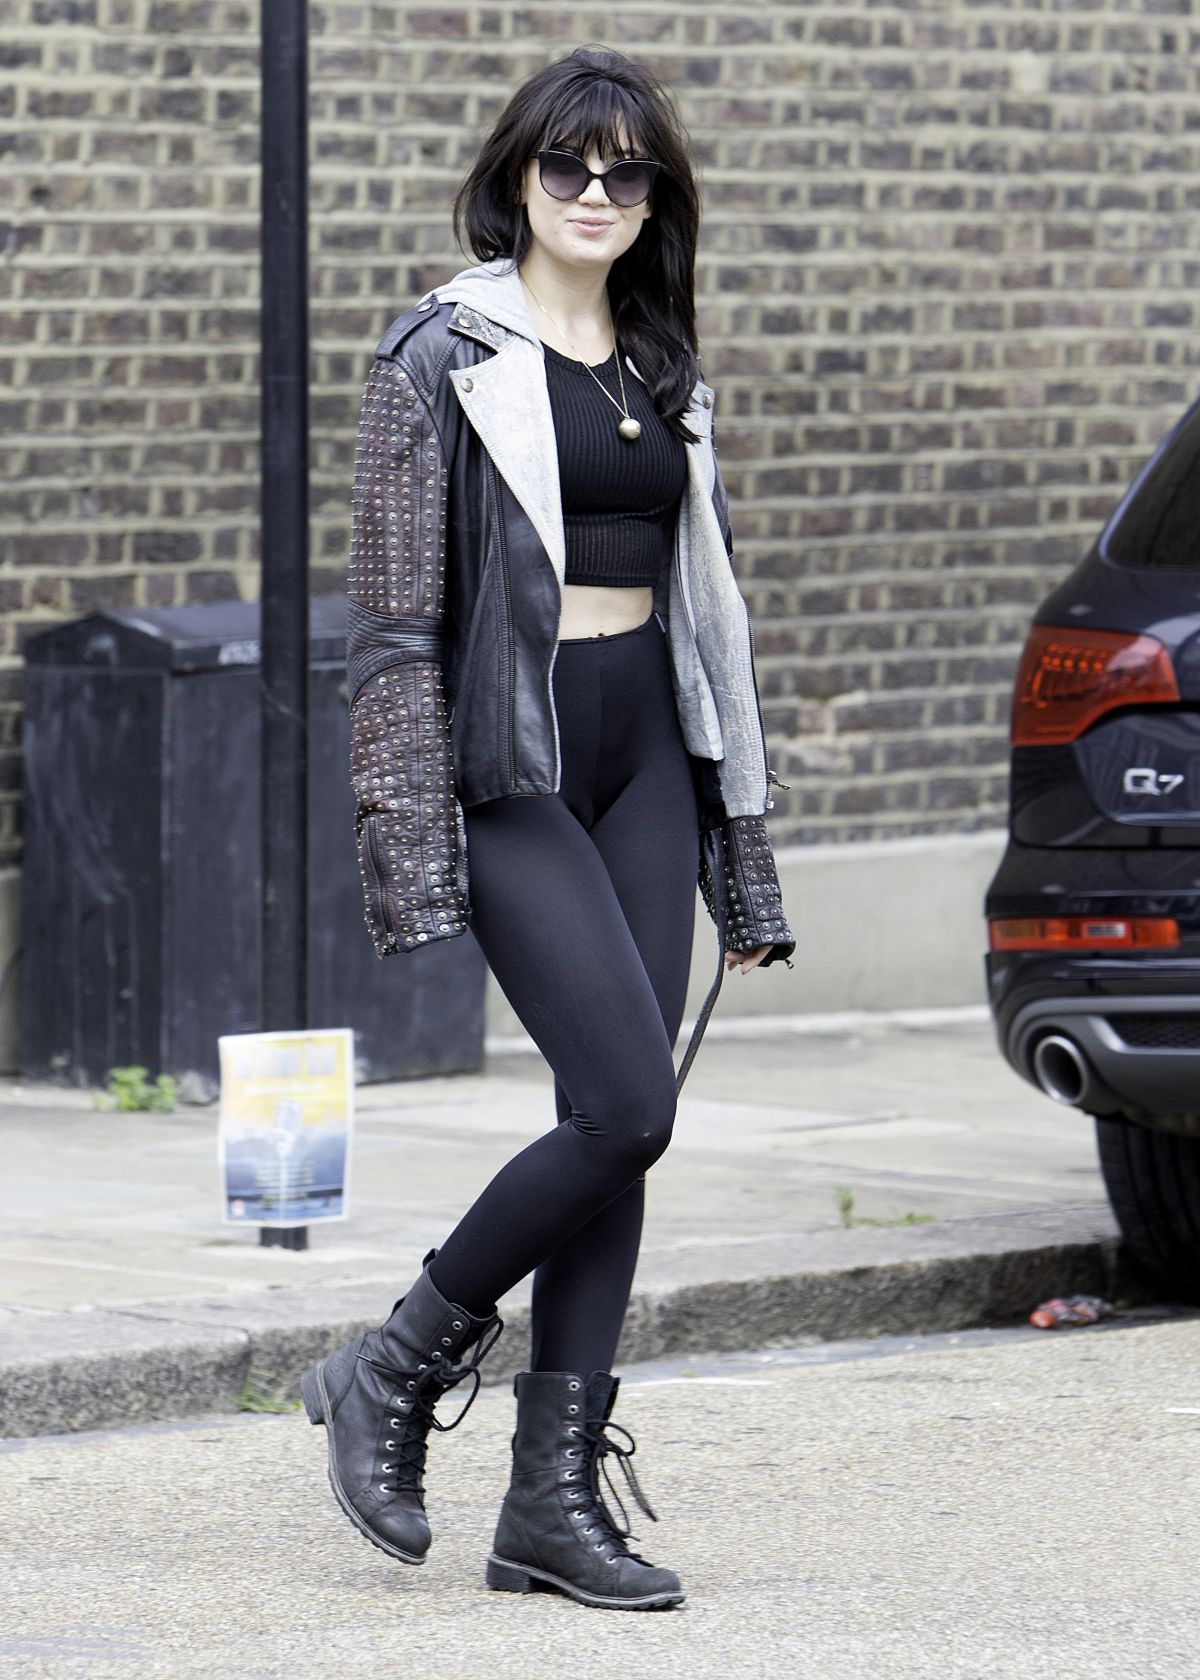 DAISY LOWE Out and About in London 09/26/2016 – HawtCelebs